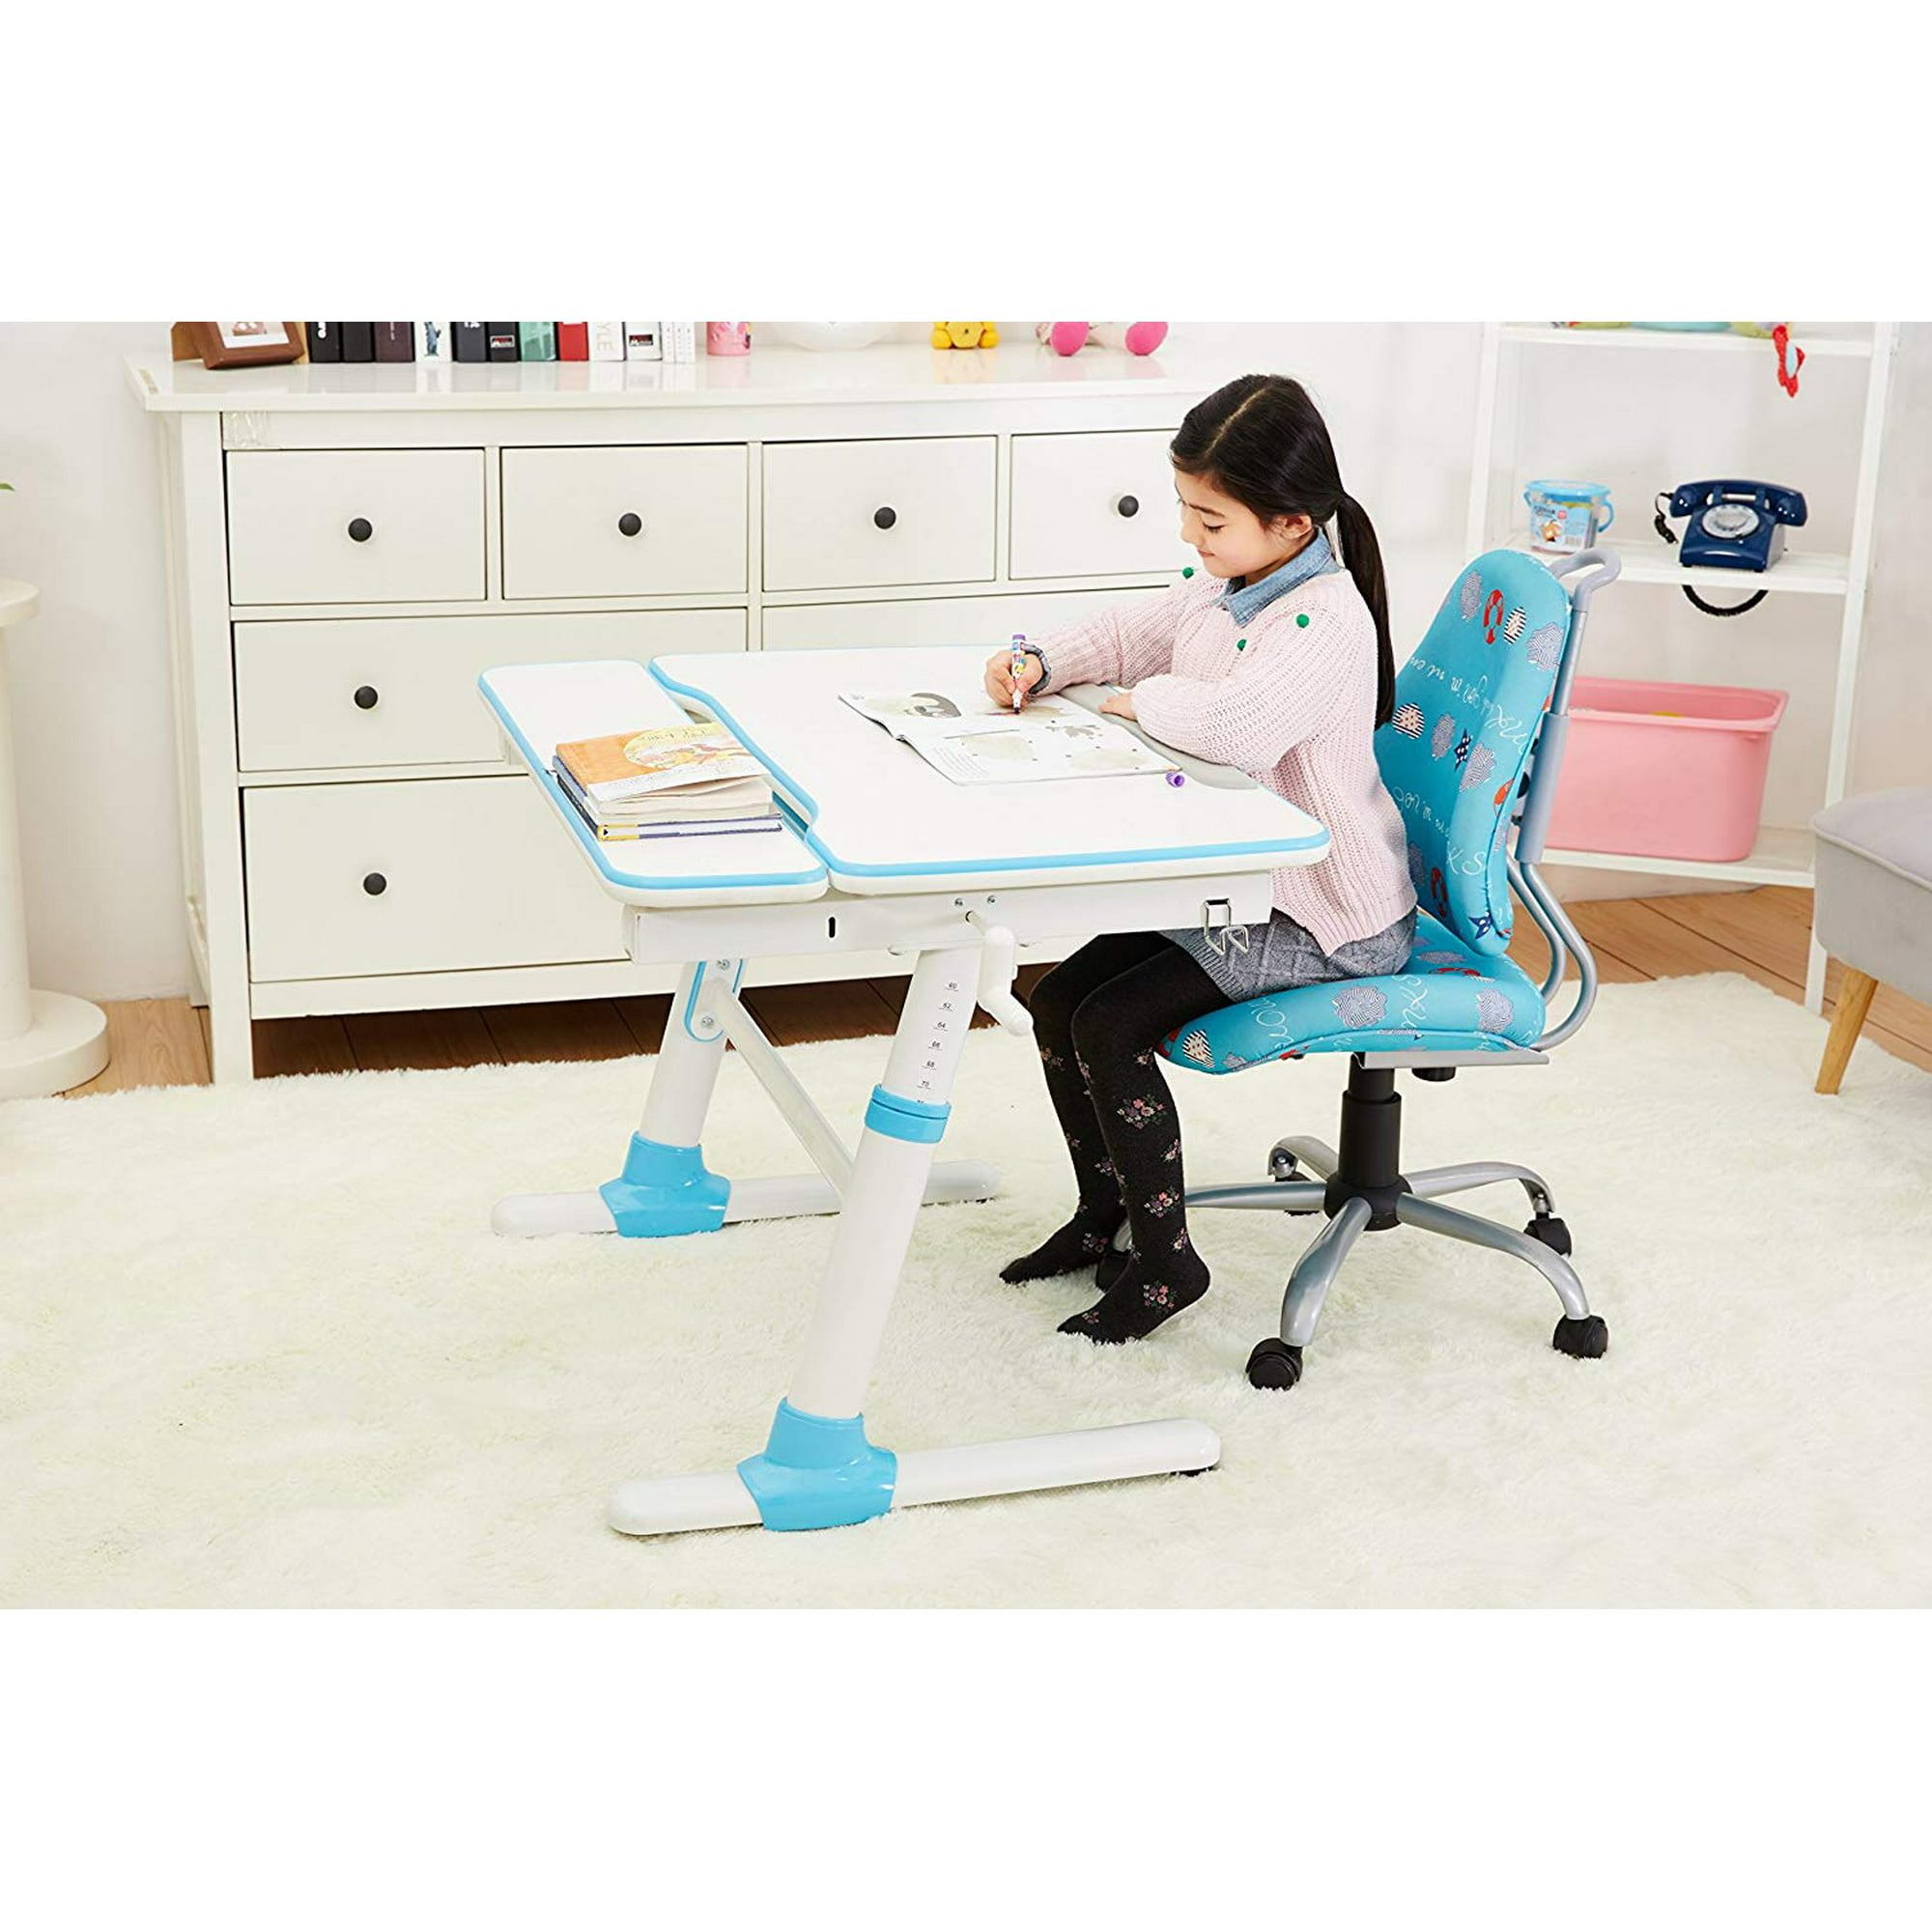 Plato Study Desk For Kids And Youth Ergonomic Kids Desk With